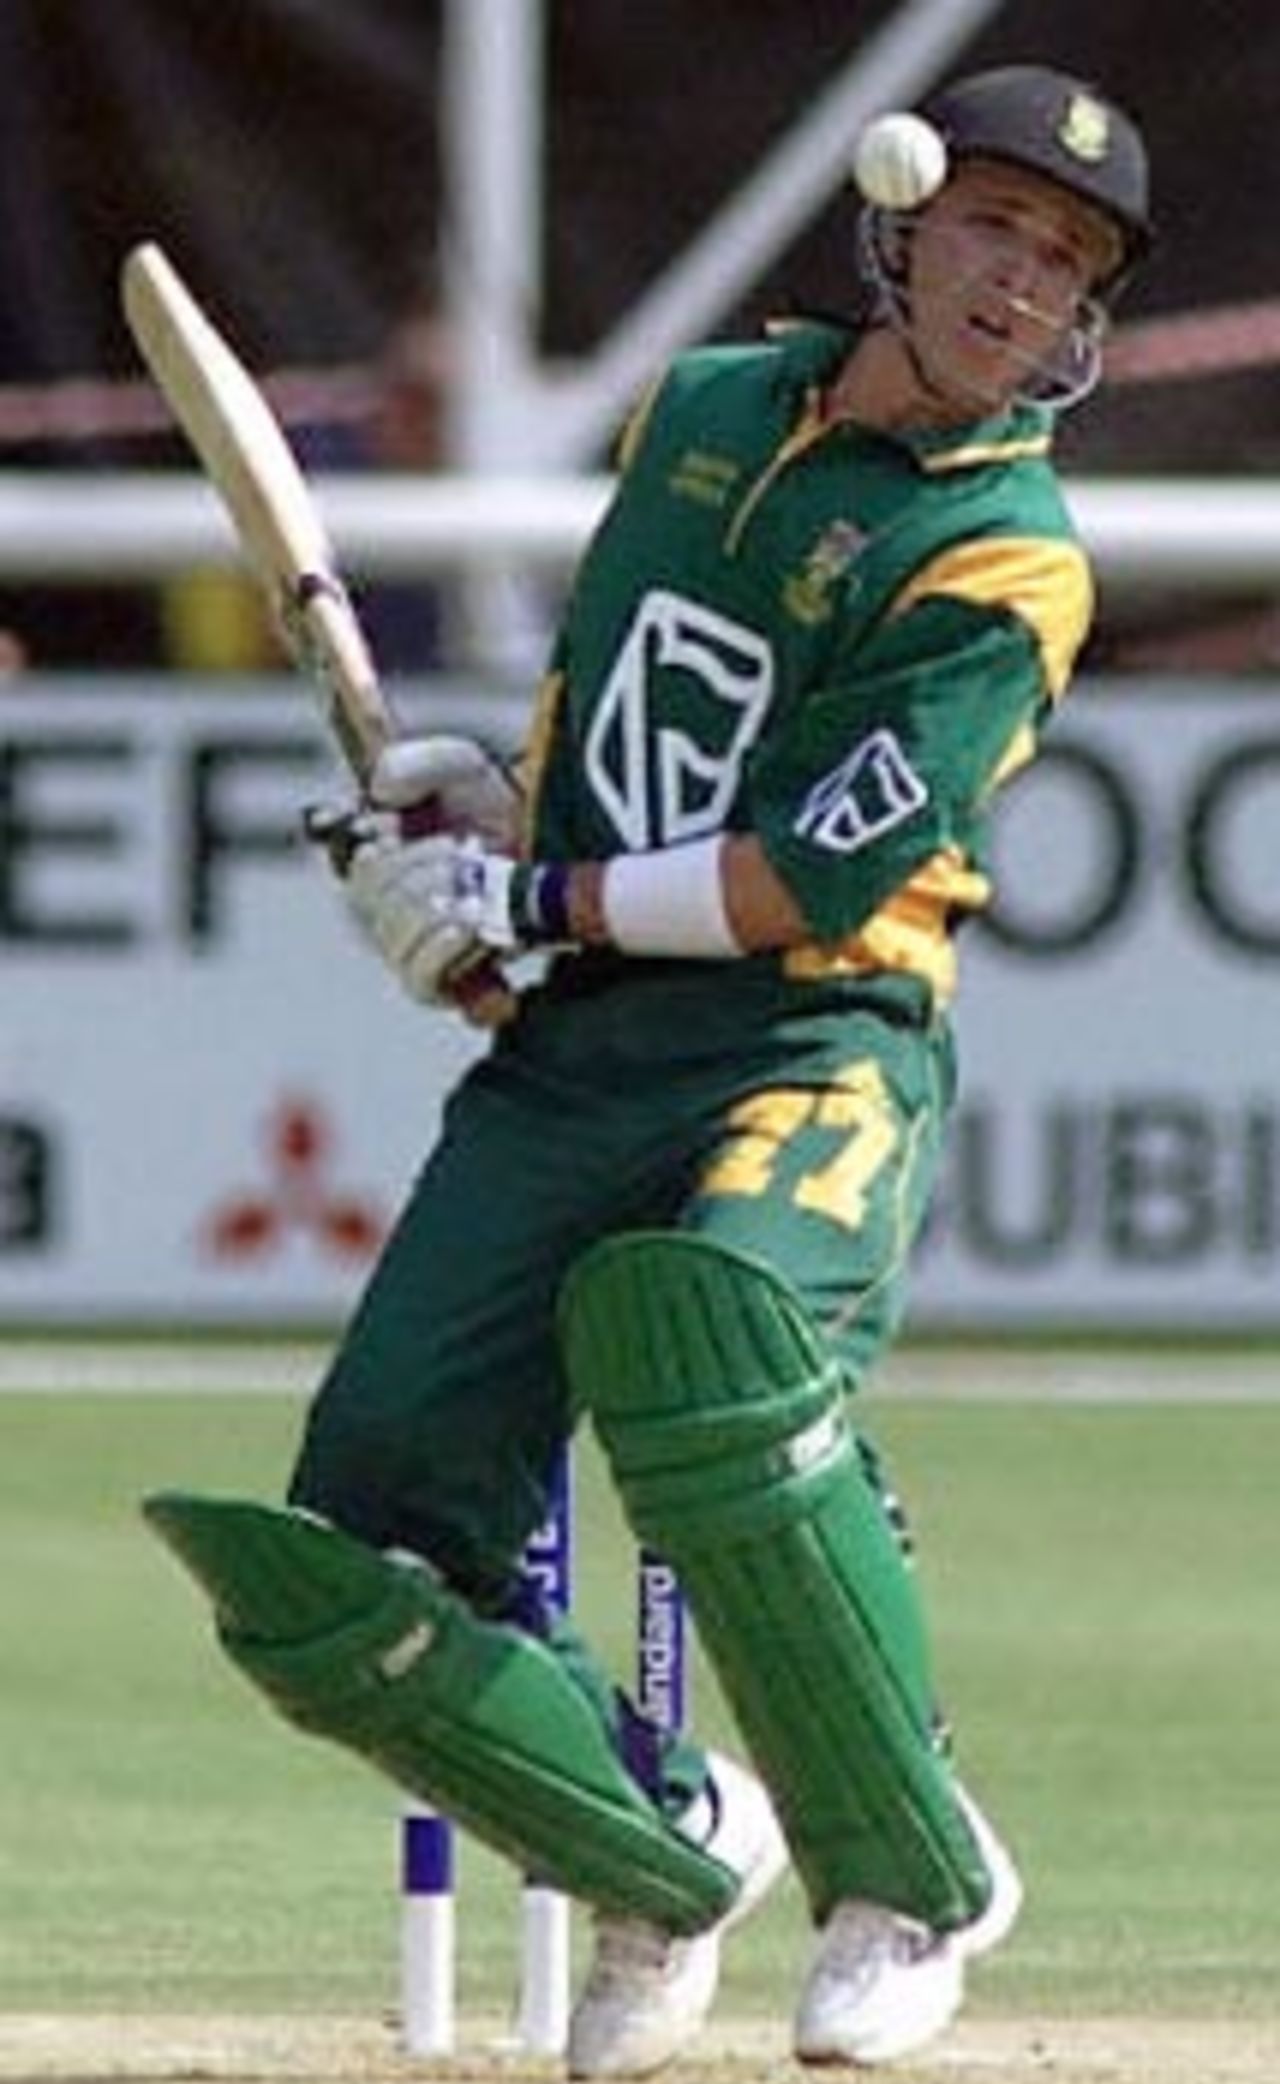 Dippenaar takes evasive action against the short ball. New Zealand in South Africa 2000/01, 1st ODI, South Africa v New Zealand North West Cricket Stadium, Potchefstroom, 20 October 2000